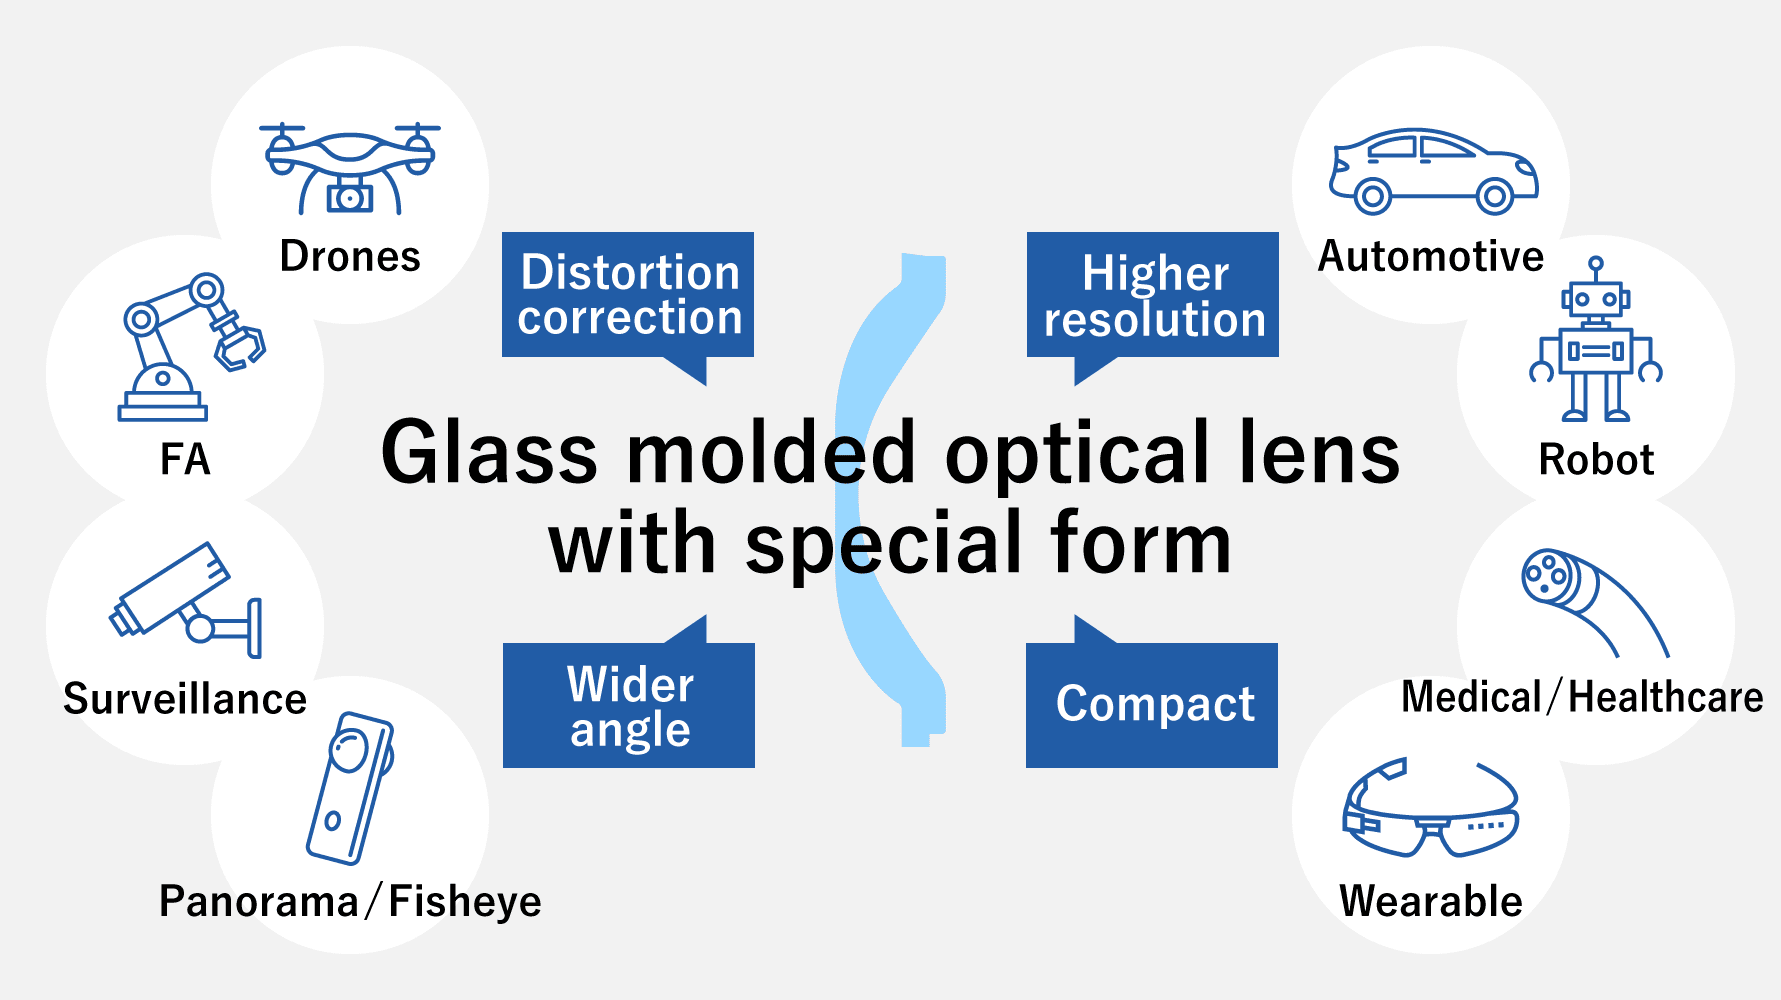 Effect by using seagull wing shaped lens and expected applications